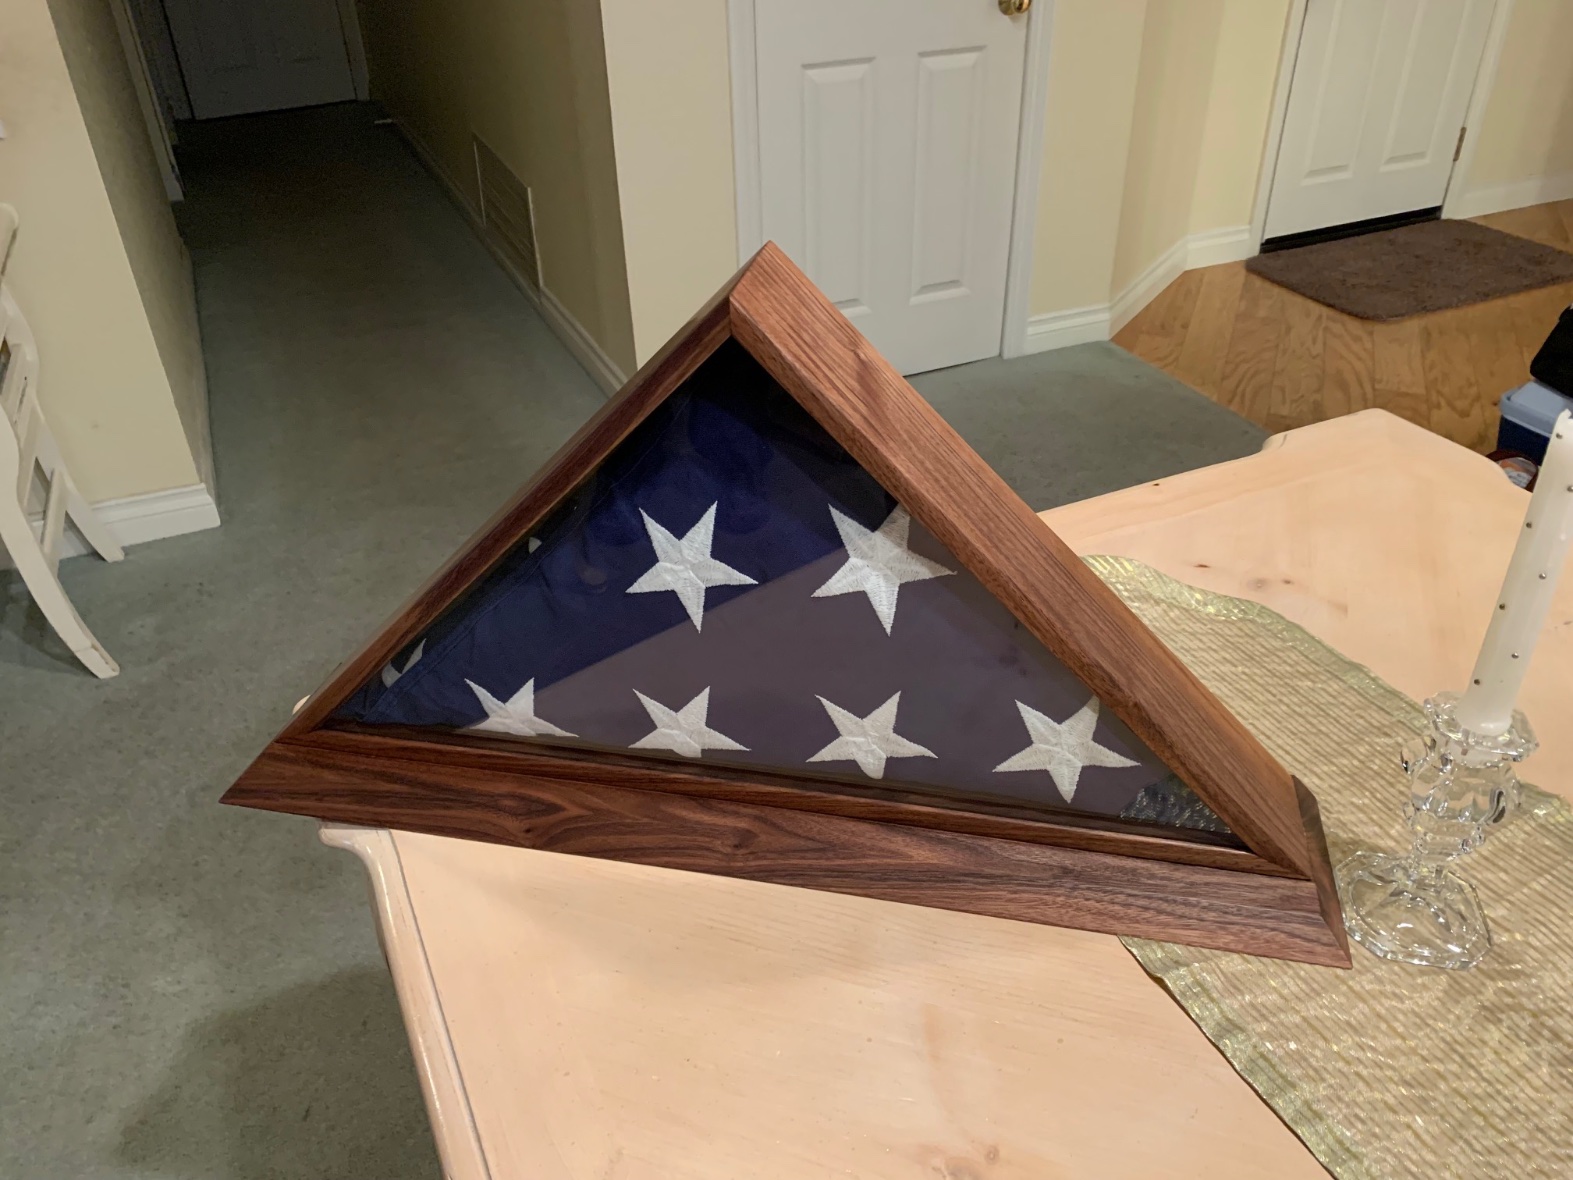 Angled view with flag inside